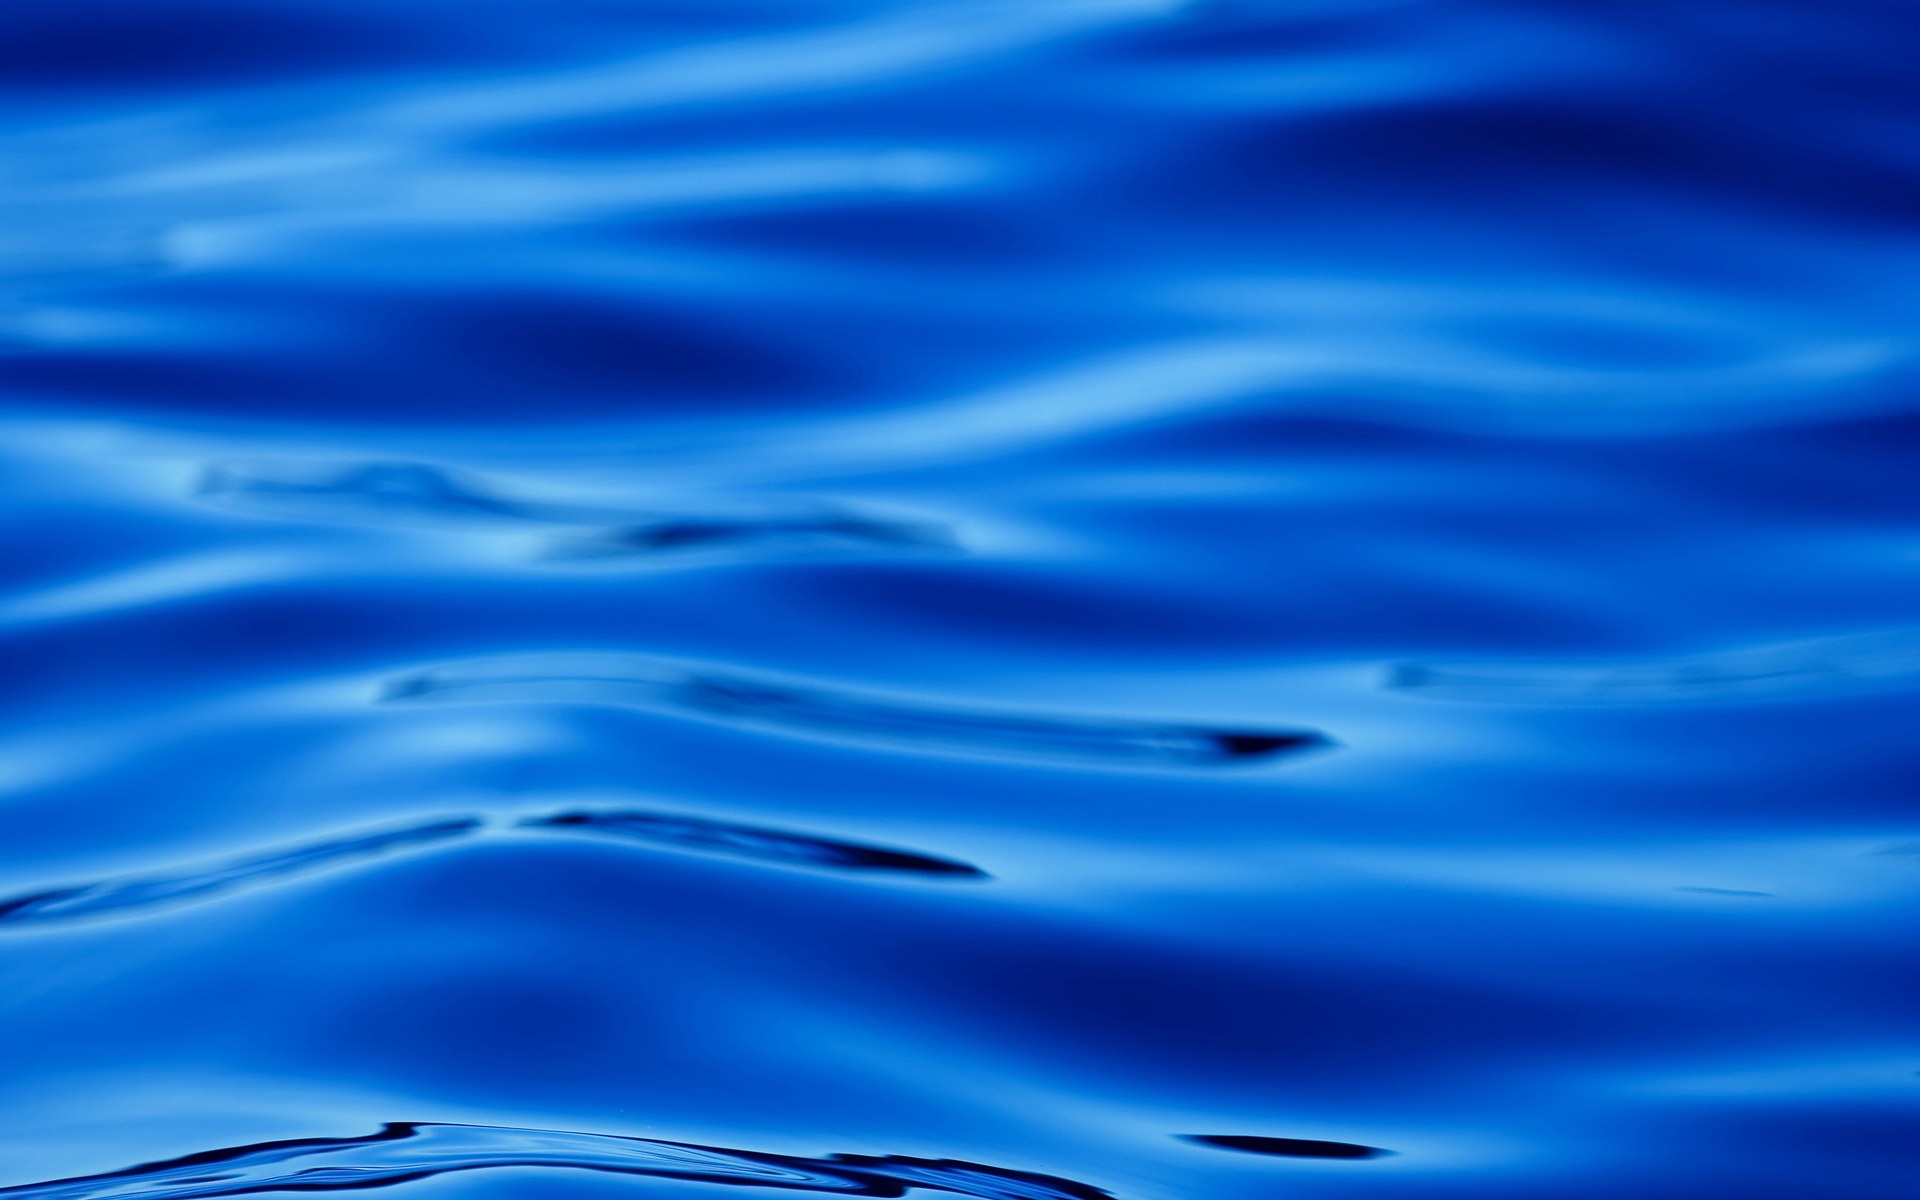 Blue Water Photos The Advantage Of Using Animated Desktop Background